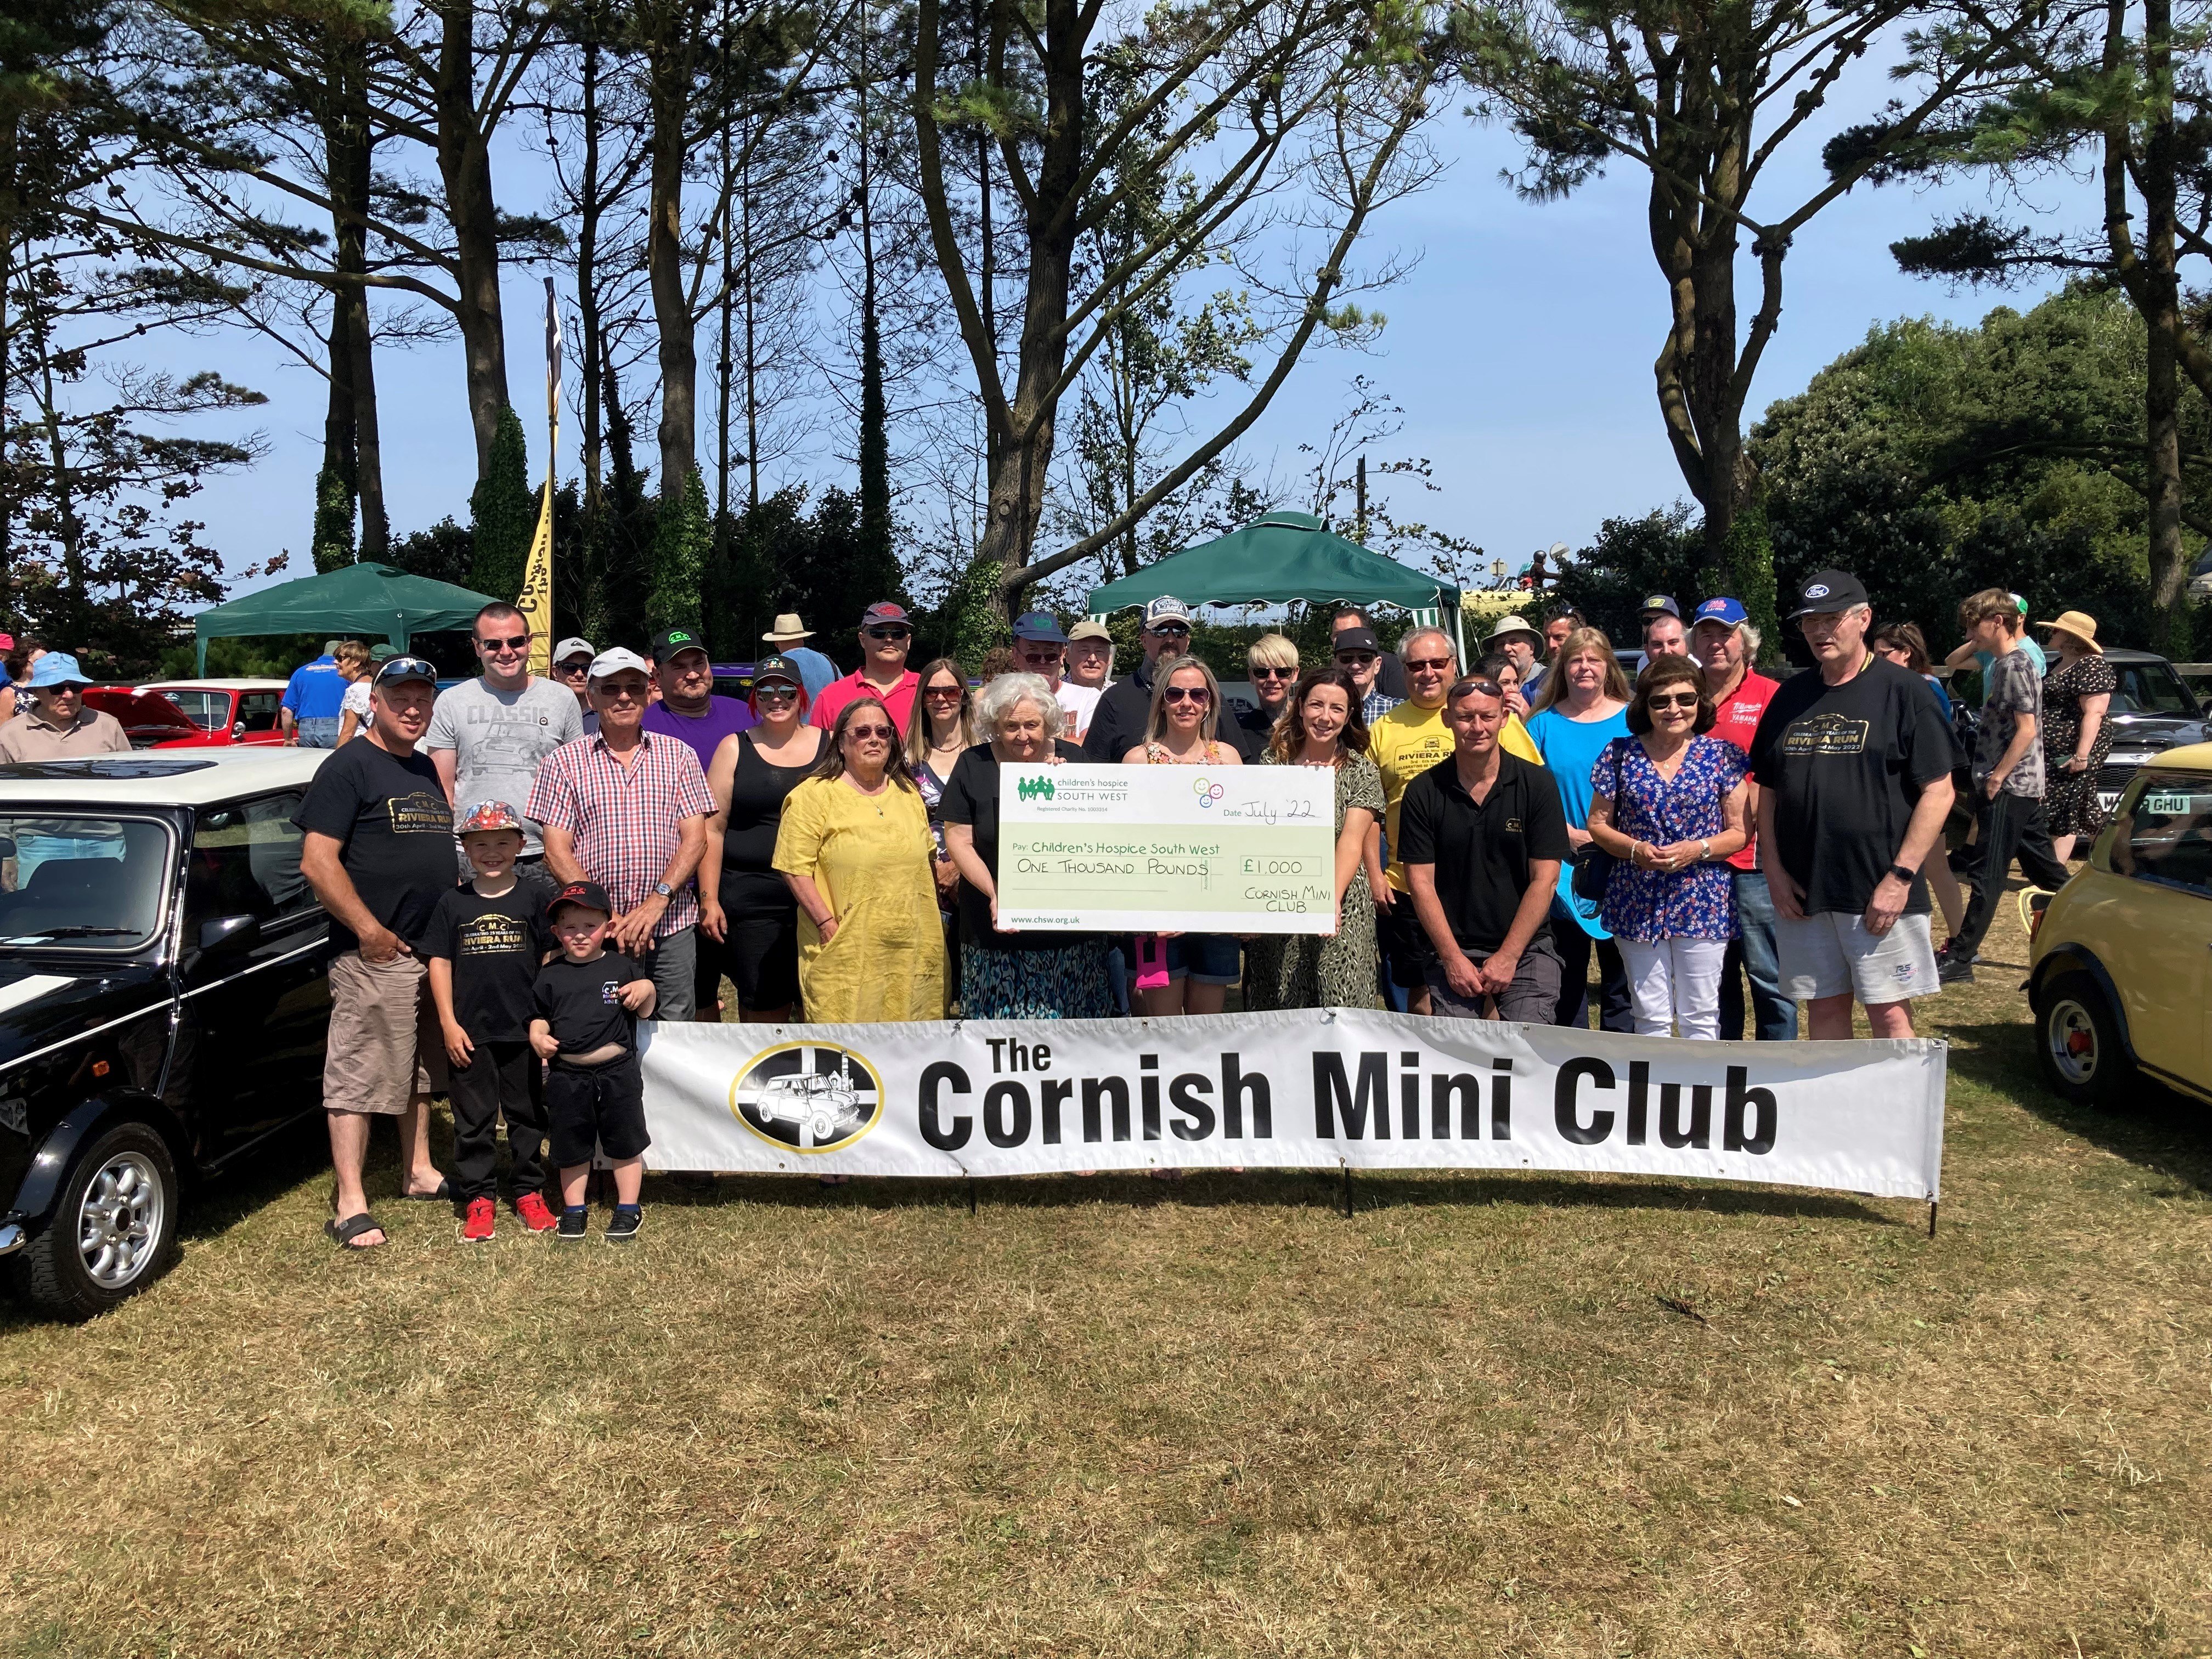 Cornish Mini Club members handover their donation to Bernadette from CHSW